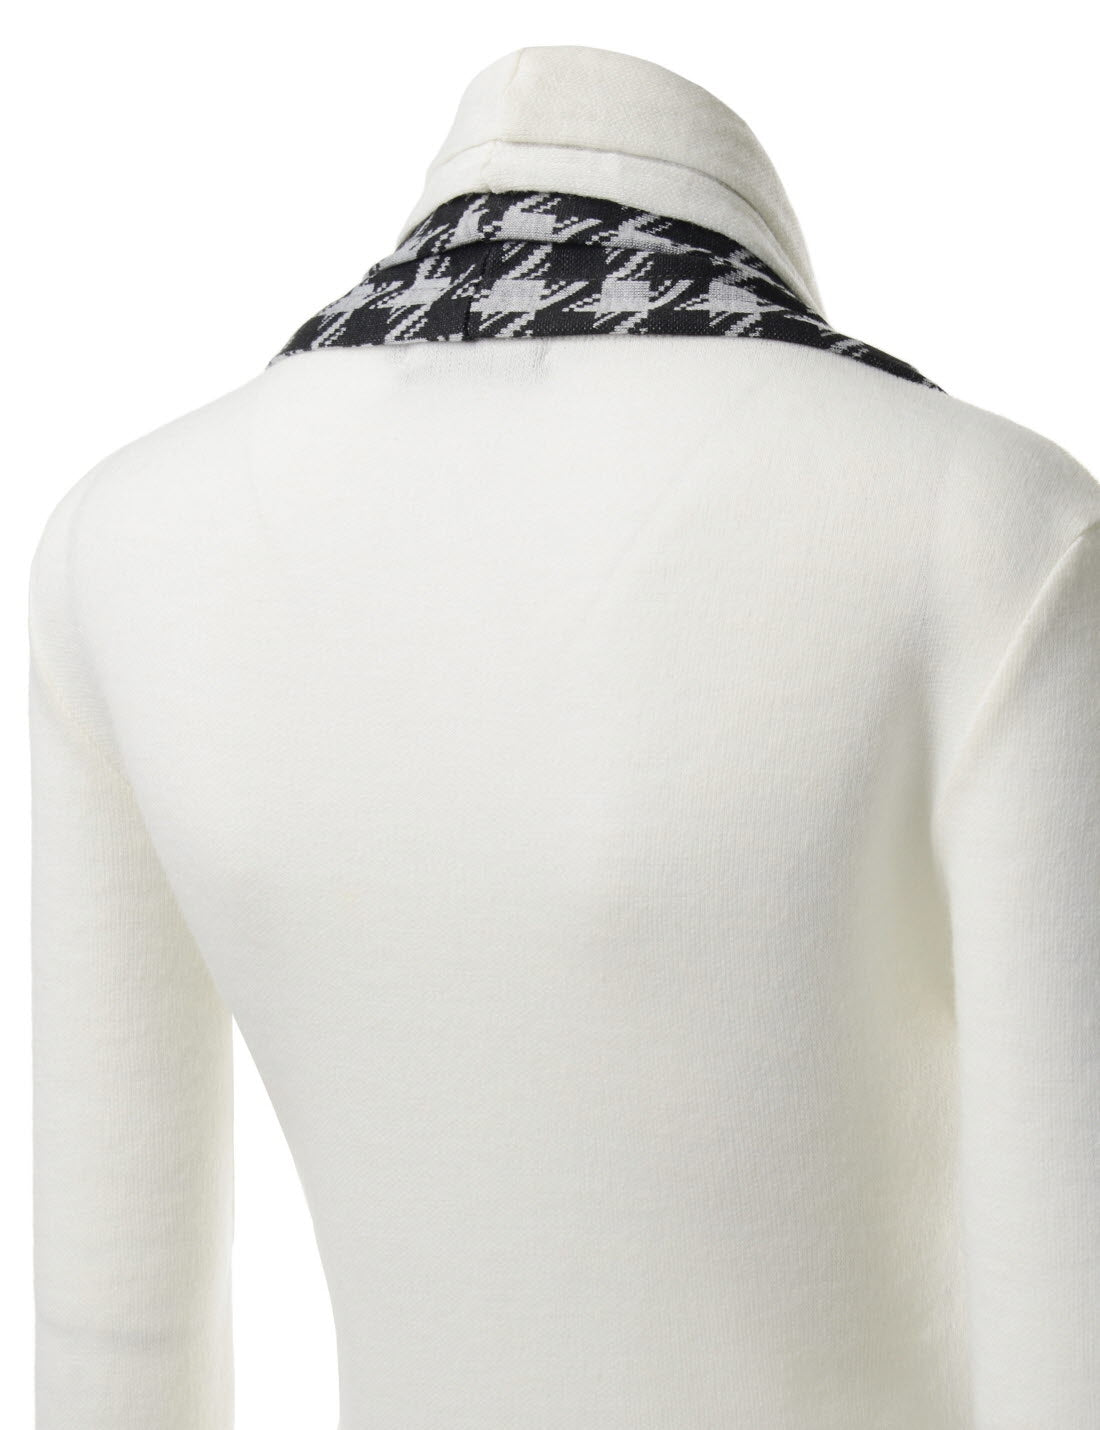 White Houndstooth Shawl Collar Knitted Open Cardigans